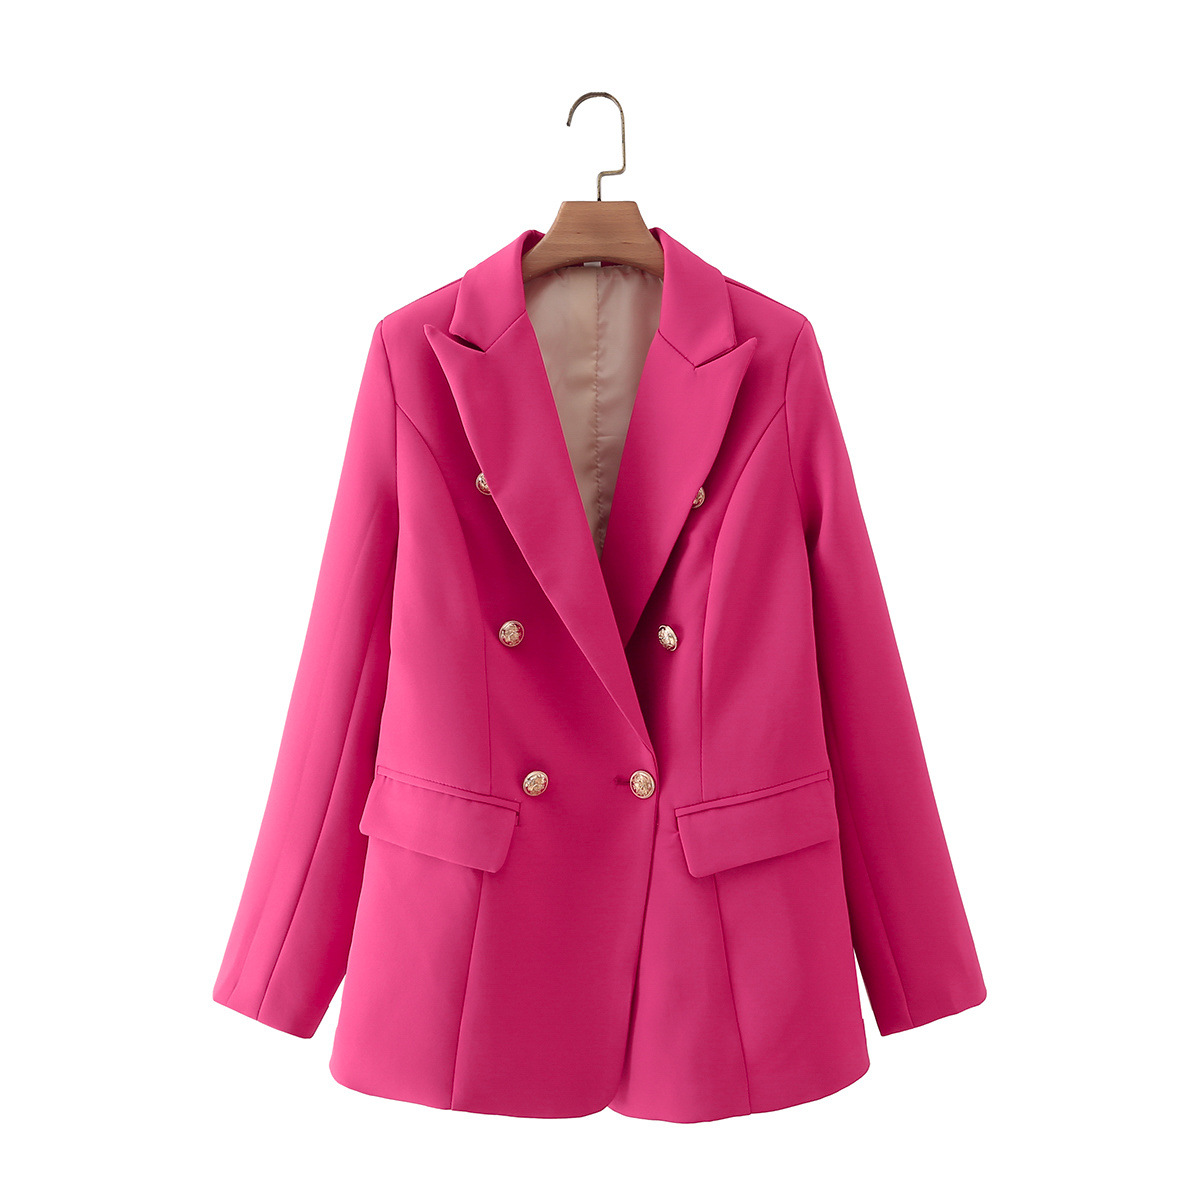 Women's Double Breasted Suit Jacket